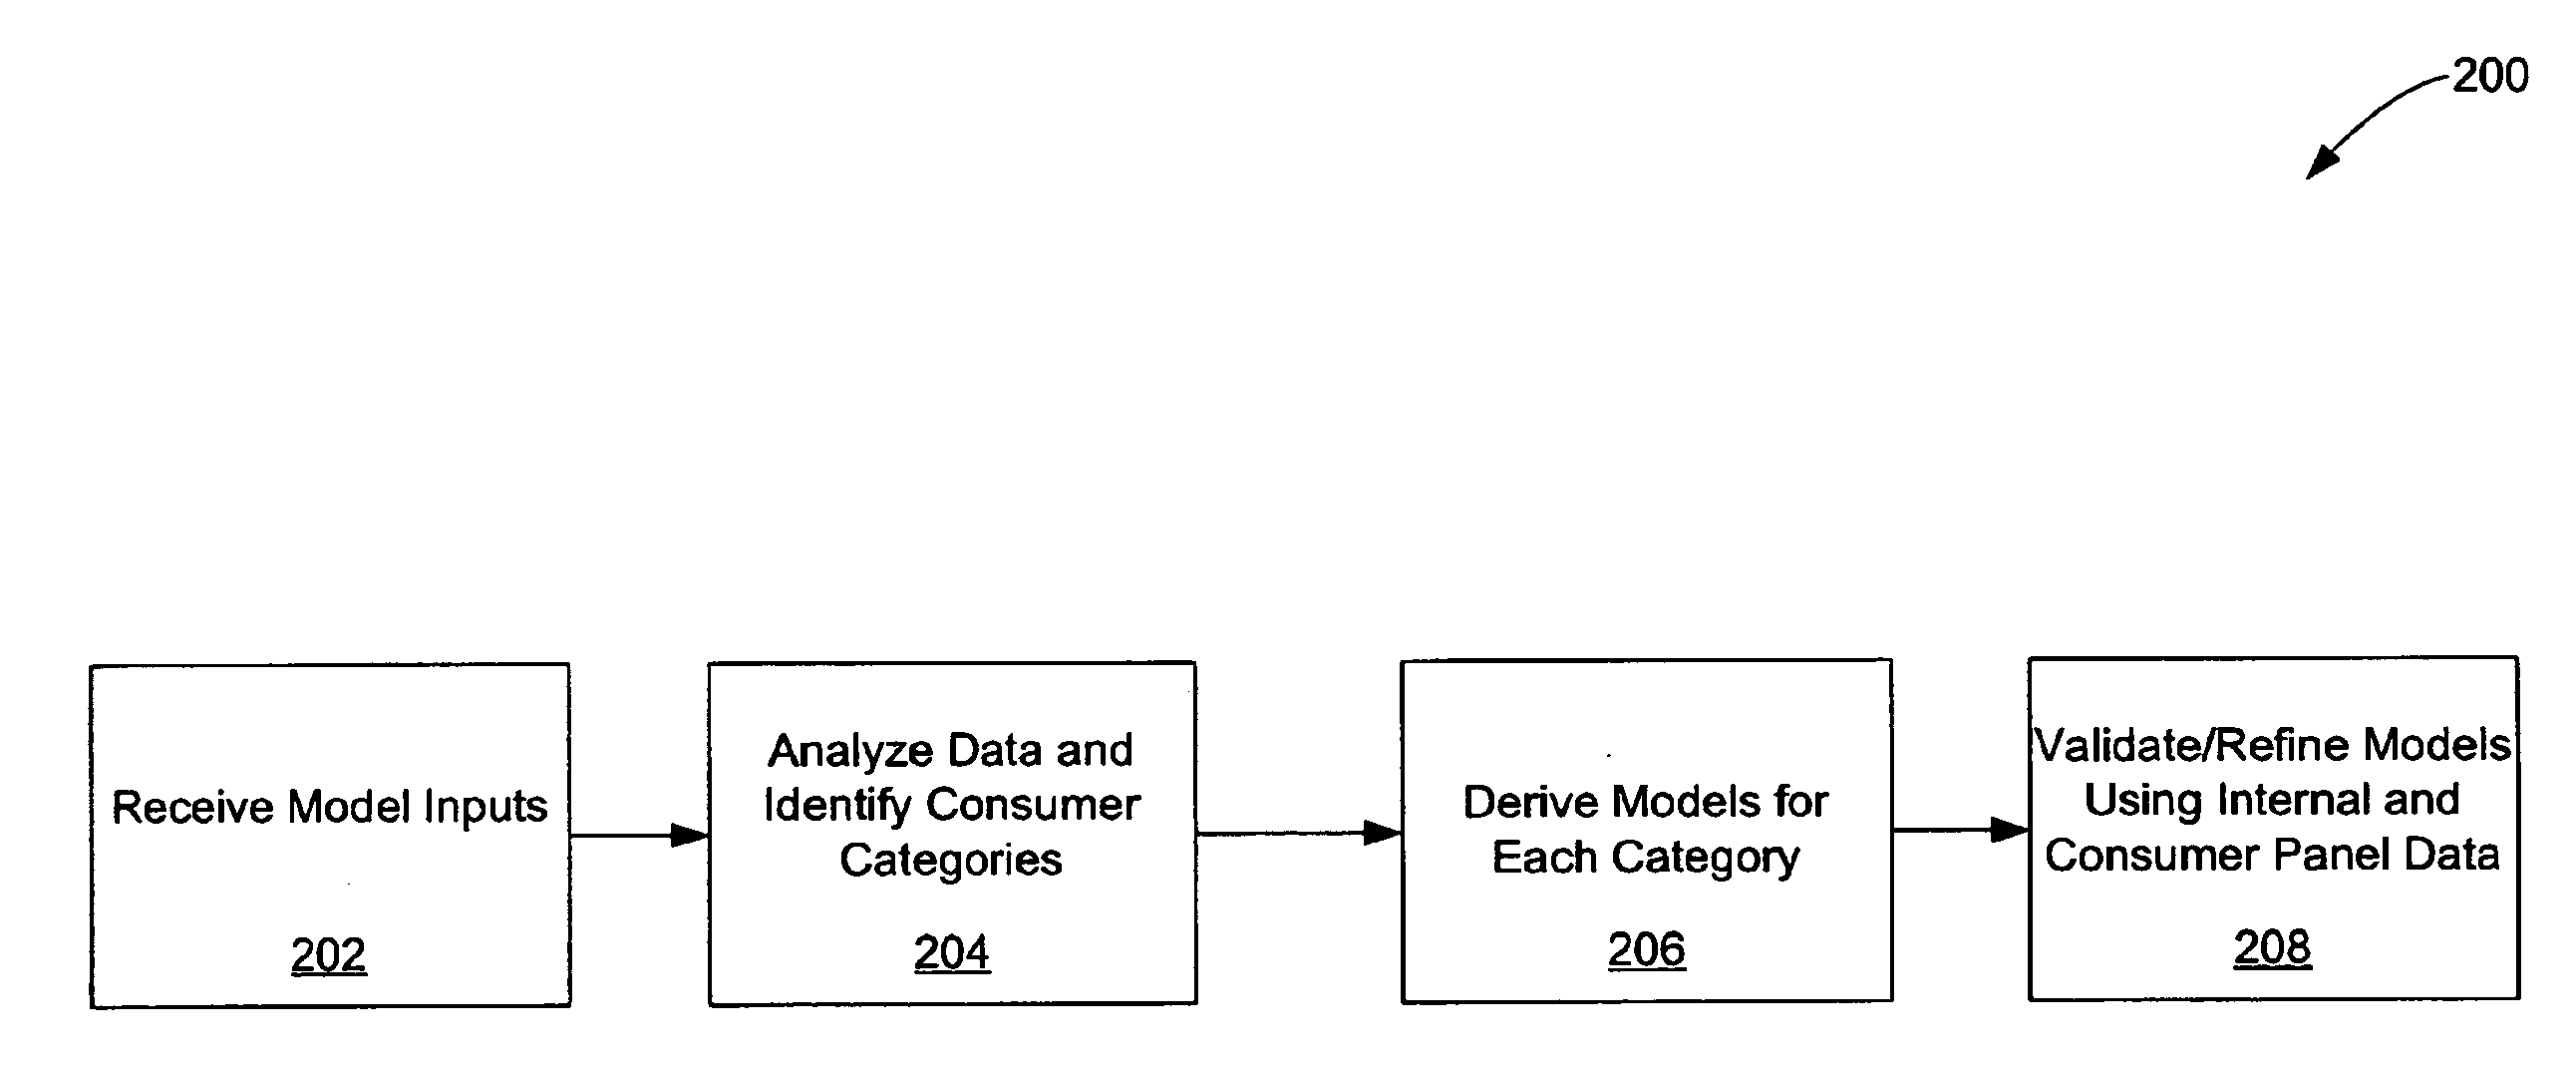 Using commercial share of wallet to analyze vendors in online marketplaces